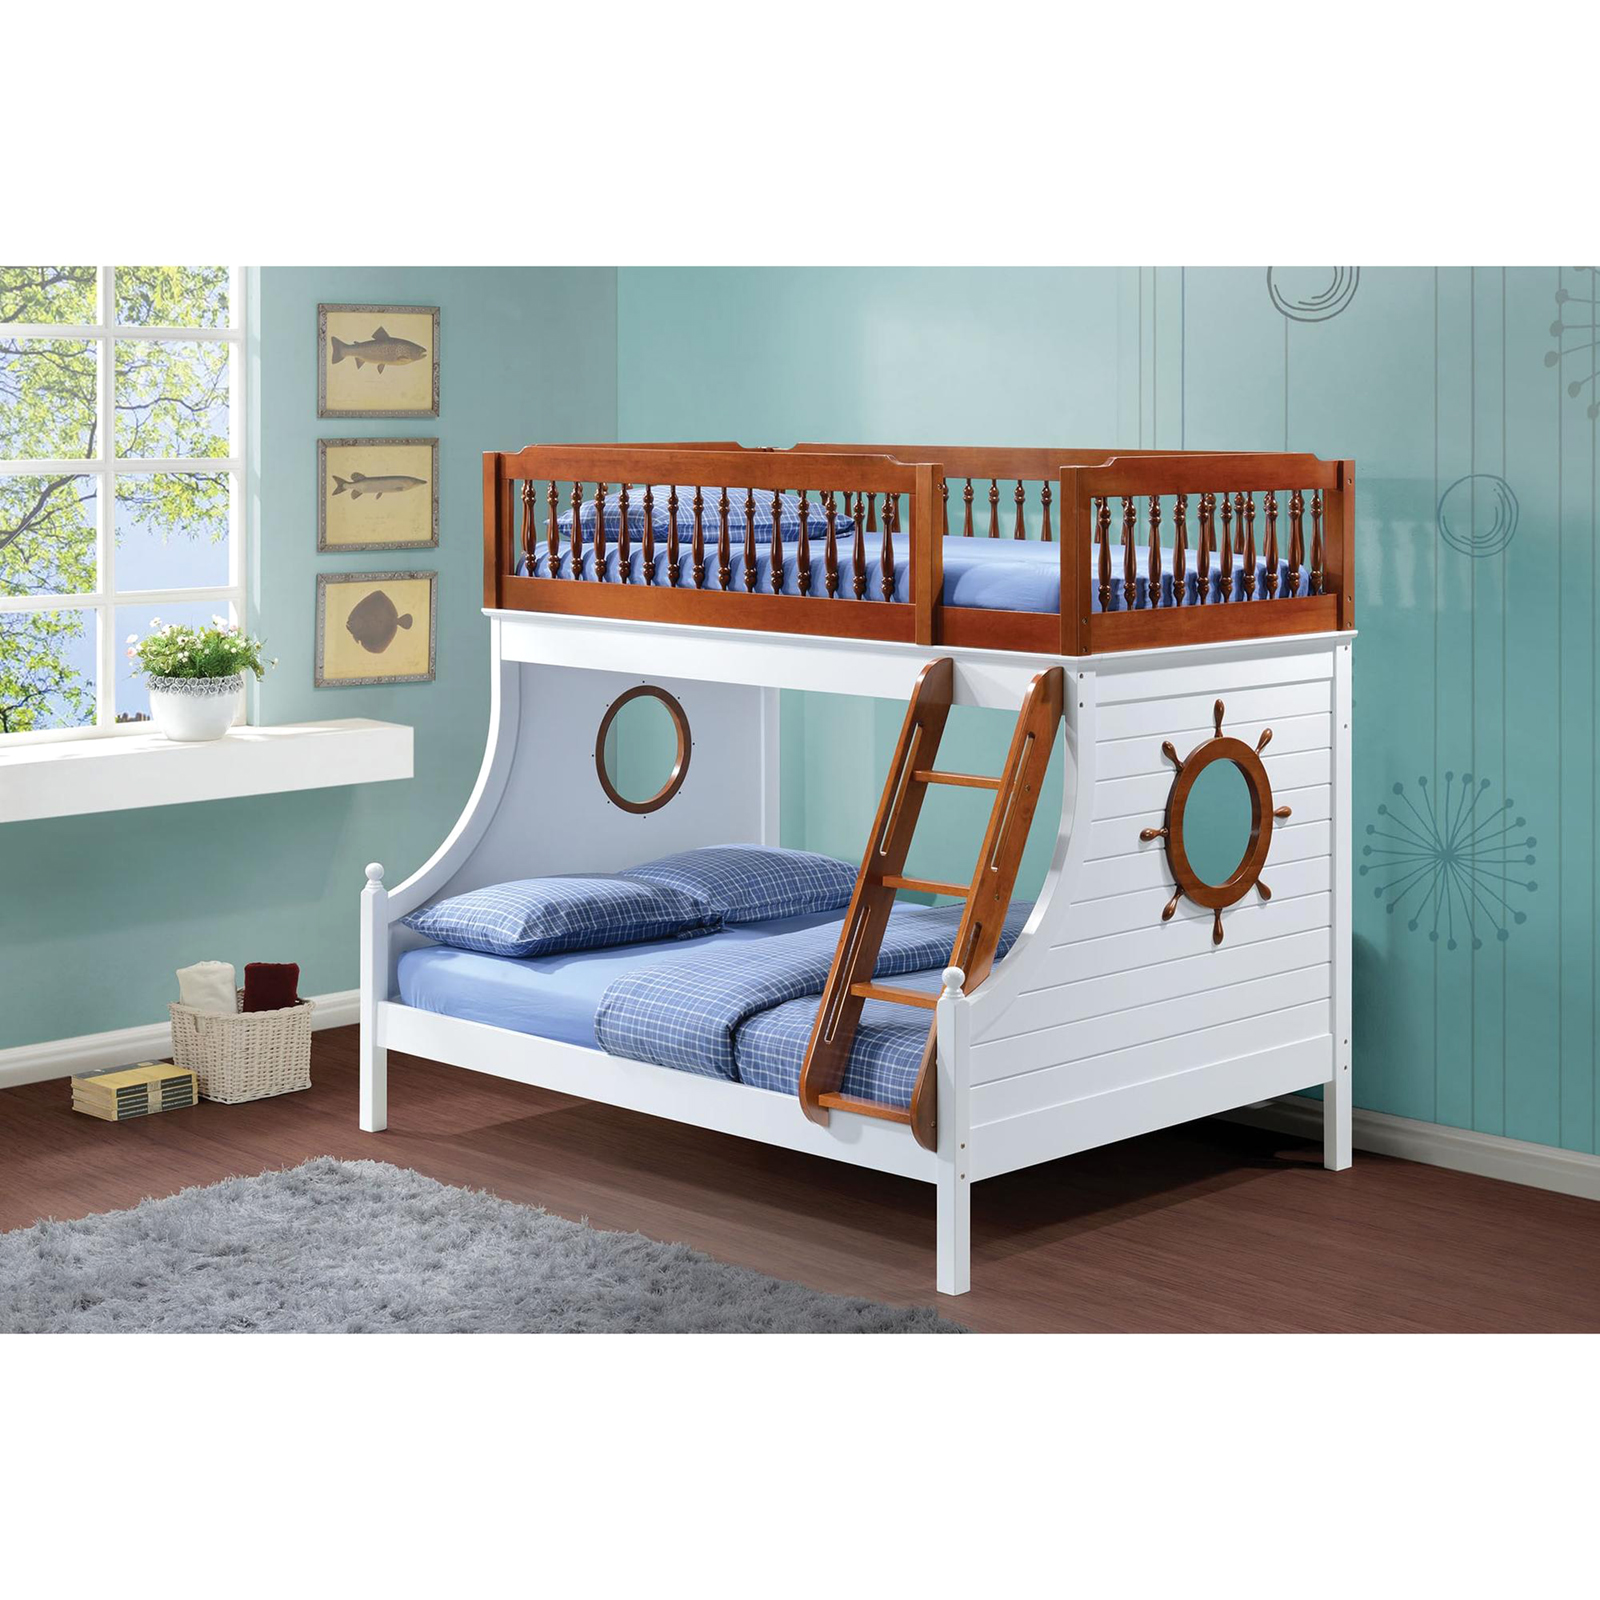 Acme Furniture Farah Twin Over Full, Acme Bunk Bed Assembly Instructions